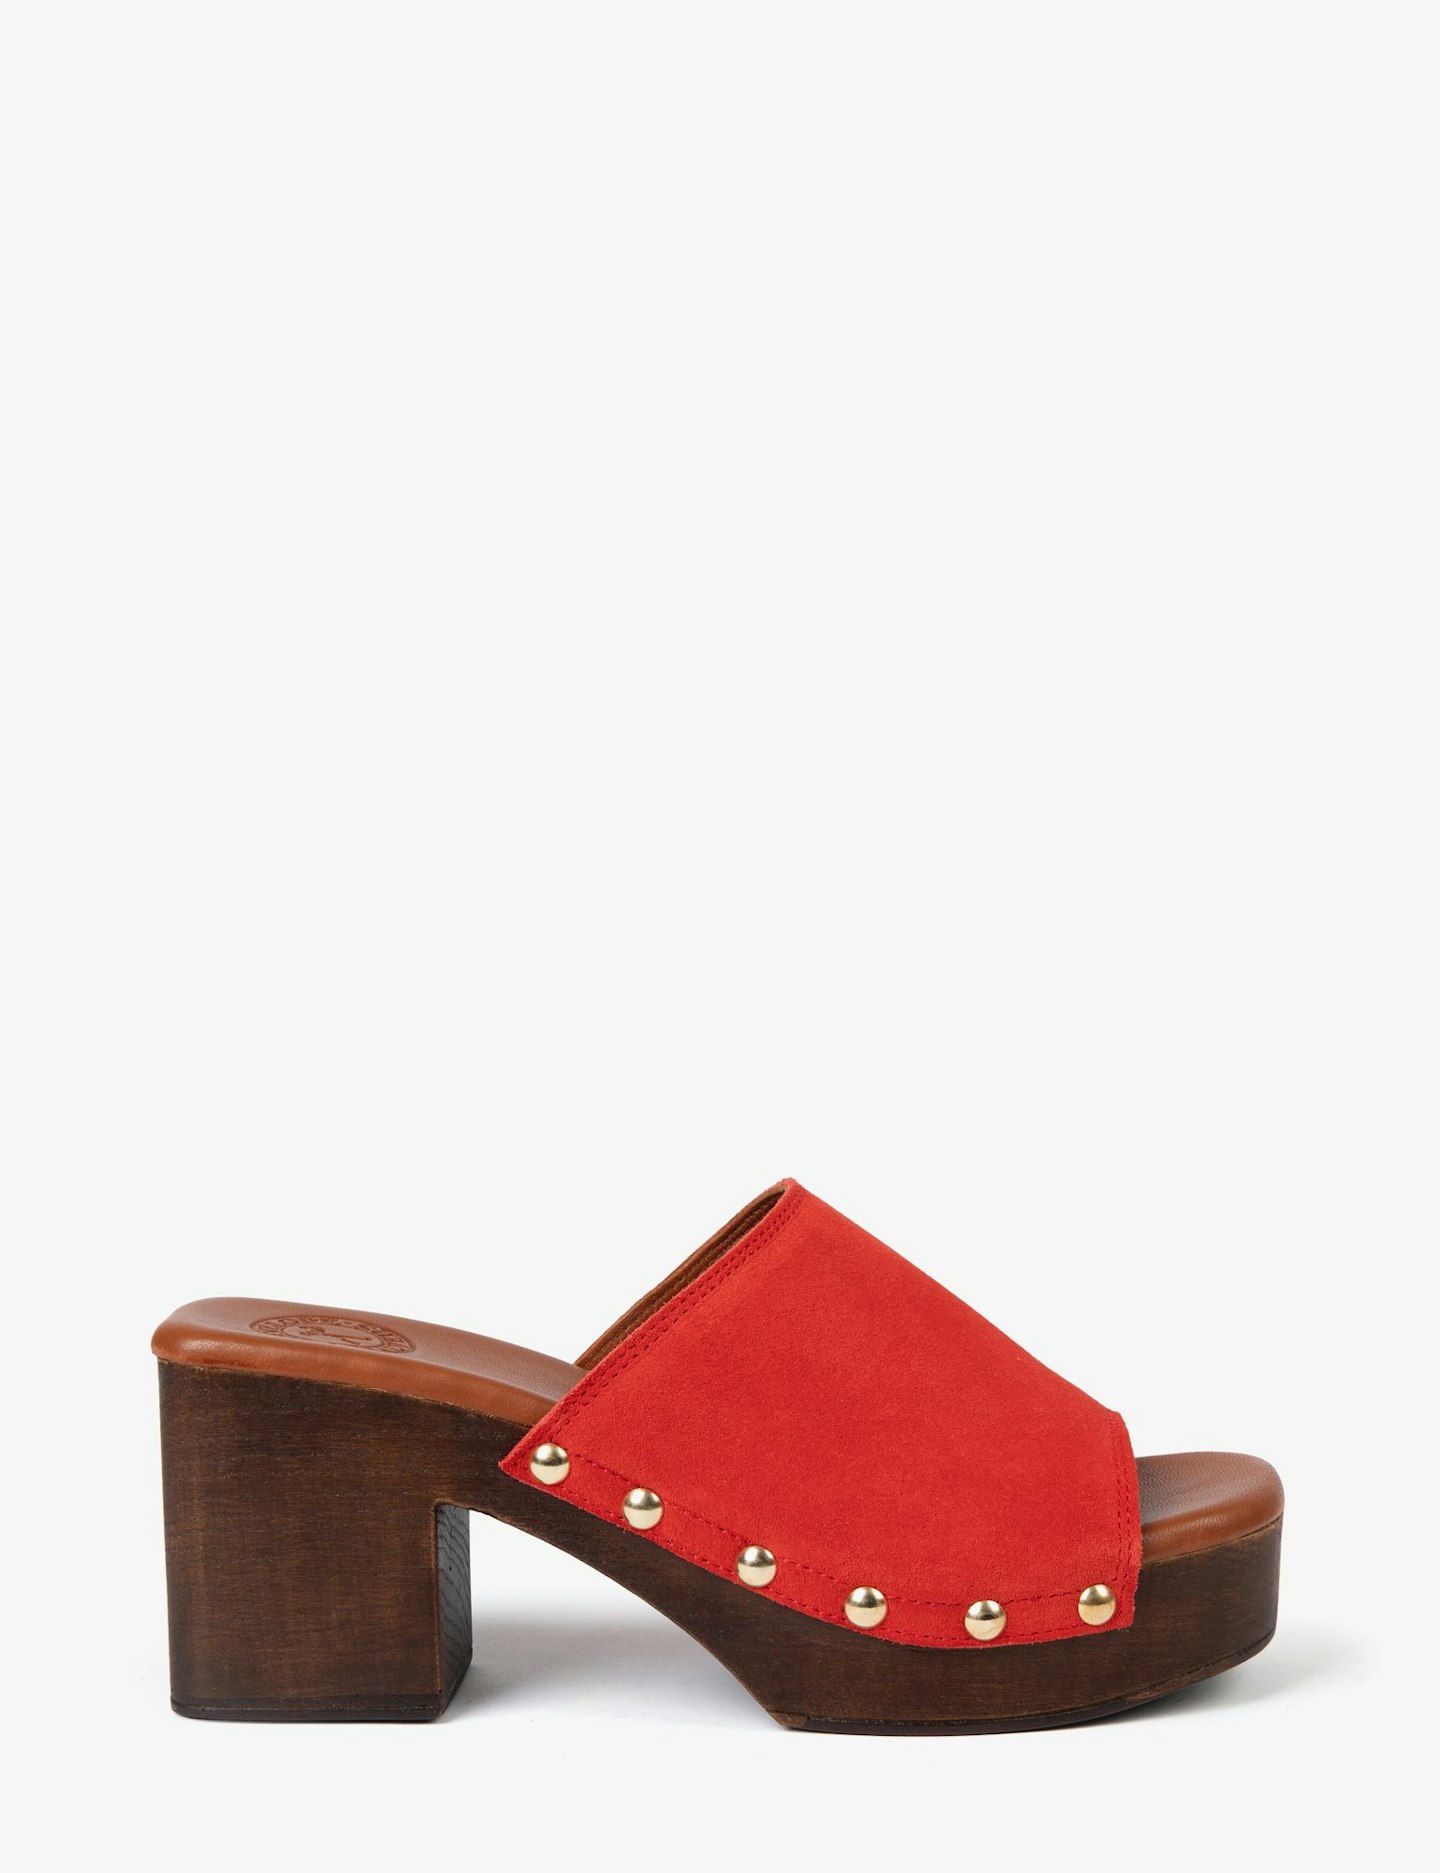 Penelope Chilvers, Arusha Suede Mule Sandals